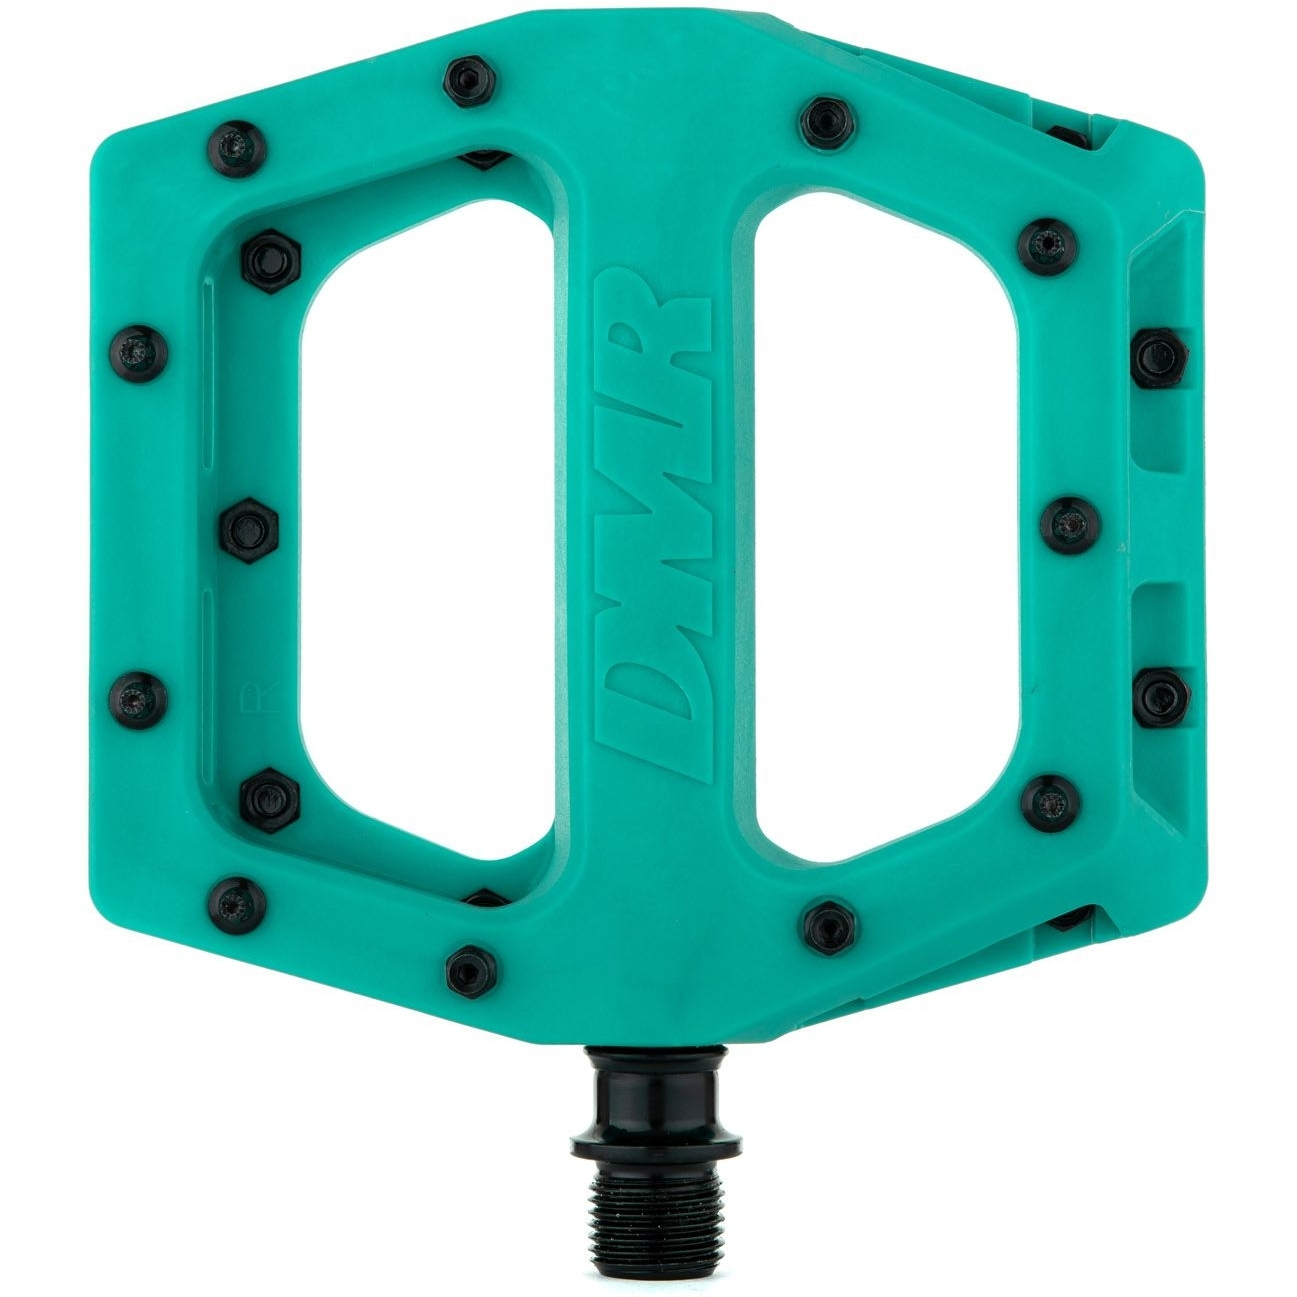 Picture of DMR V11 Flat Pedals - turquoise